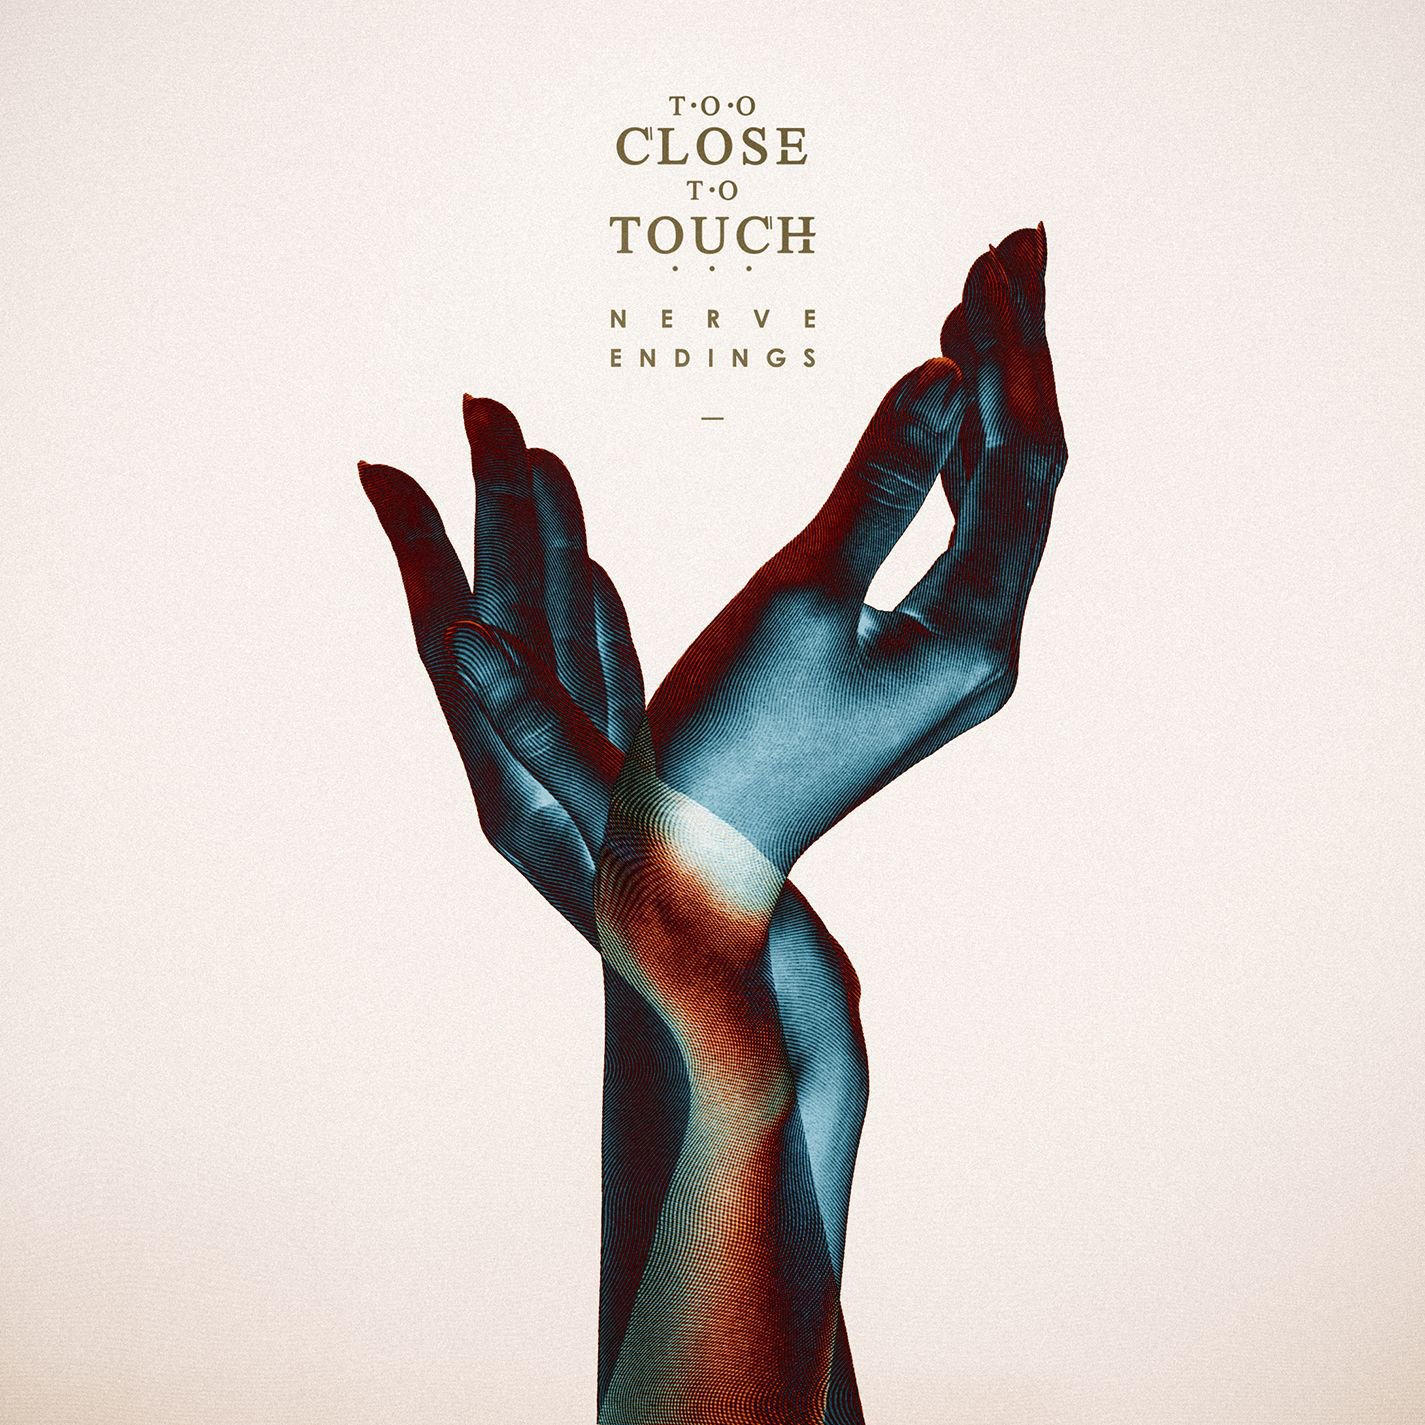 Too Close To Touch - Nerve Endings (2015) [HDTracks FLAC 24bit/44,1kHz]